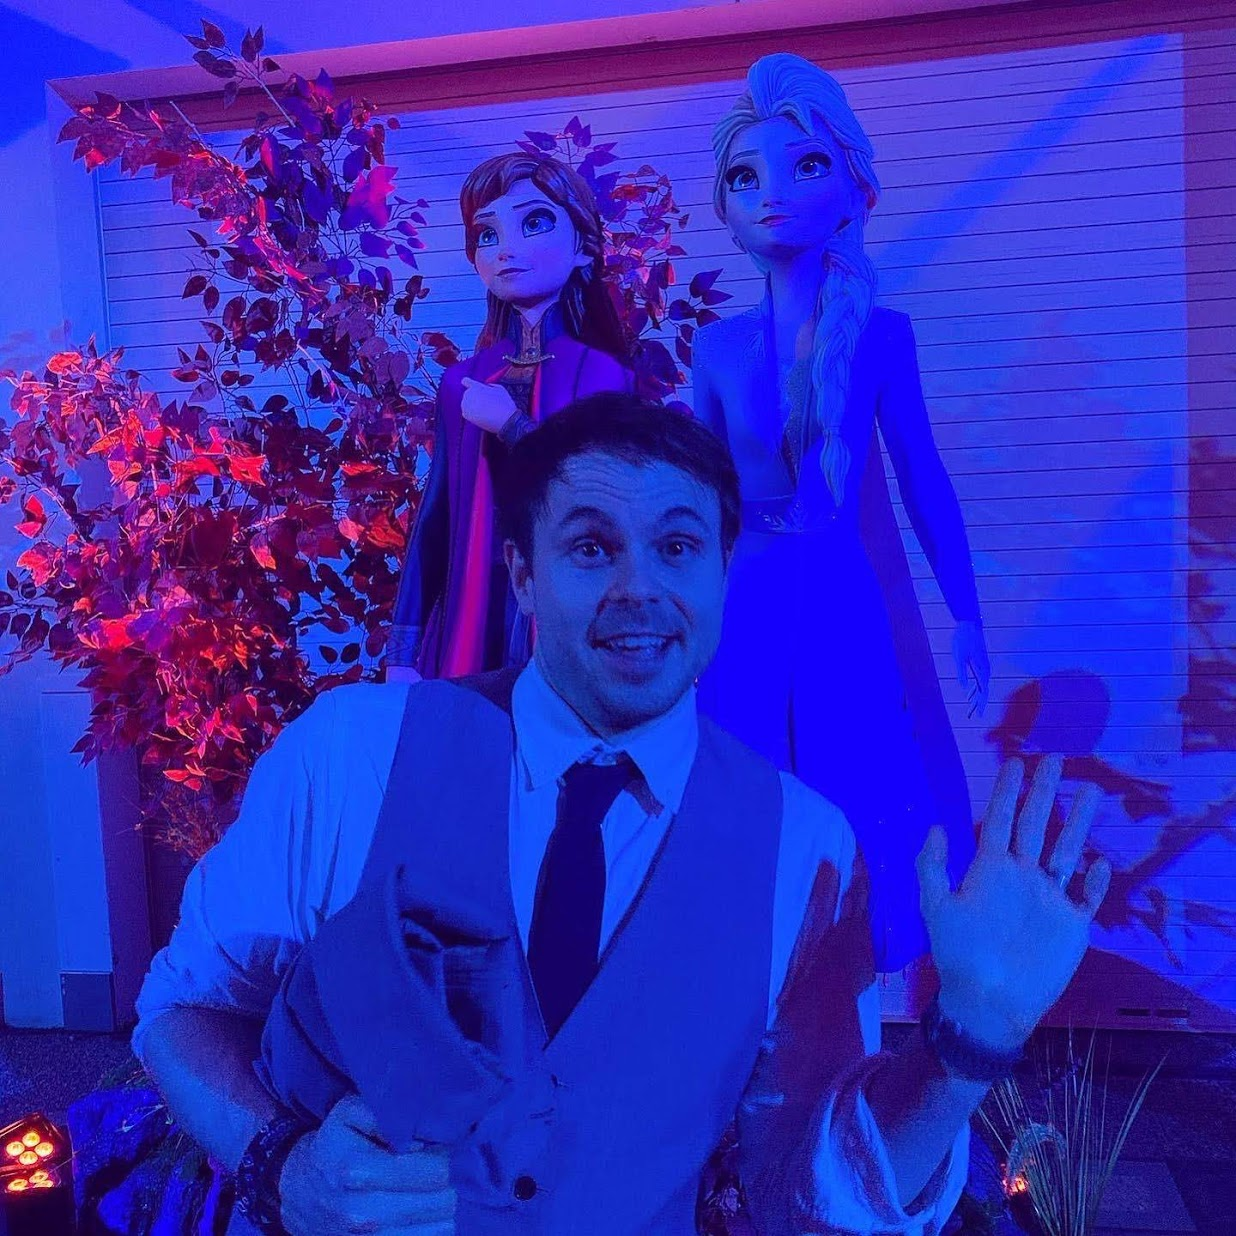 A picture of Paul in front of a statue of Elsa and Anna from the Frozen movie